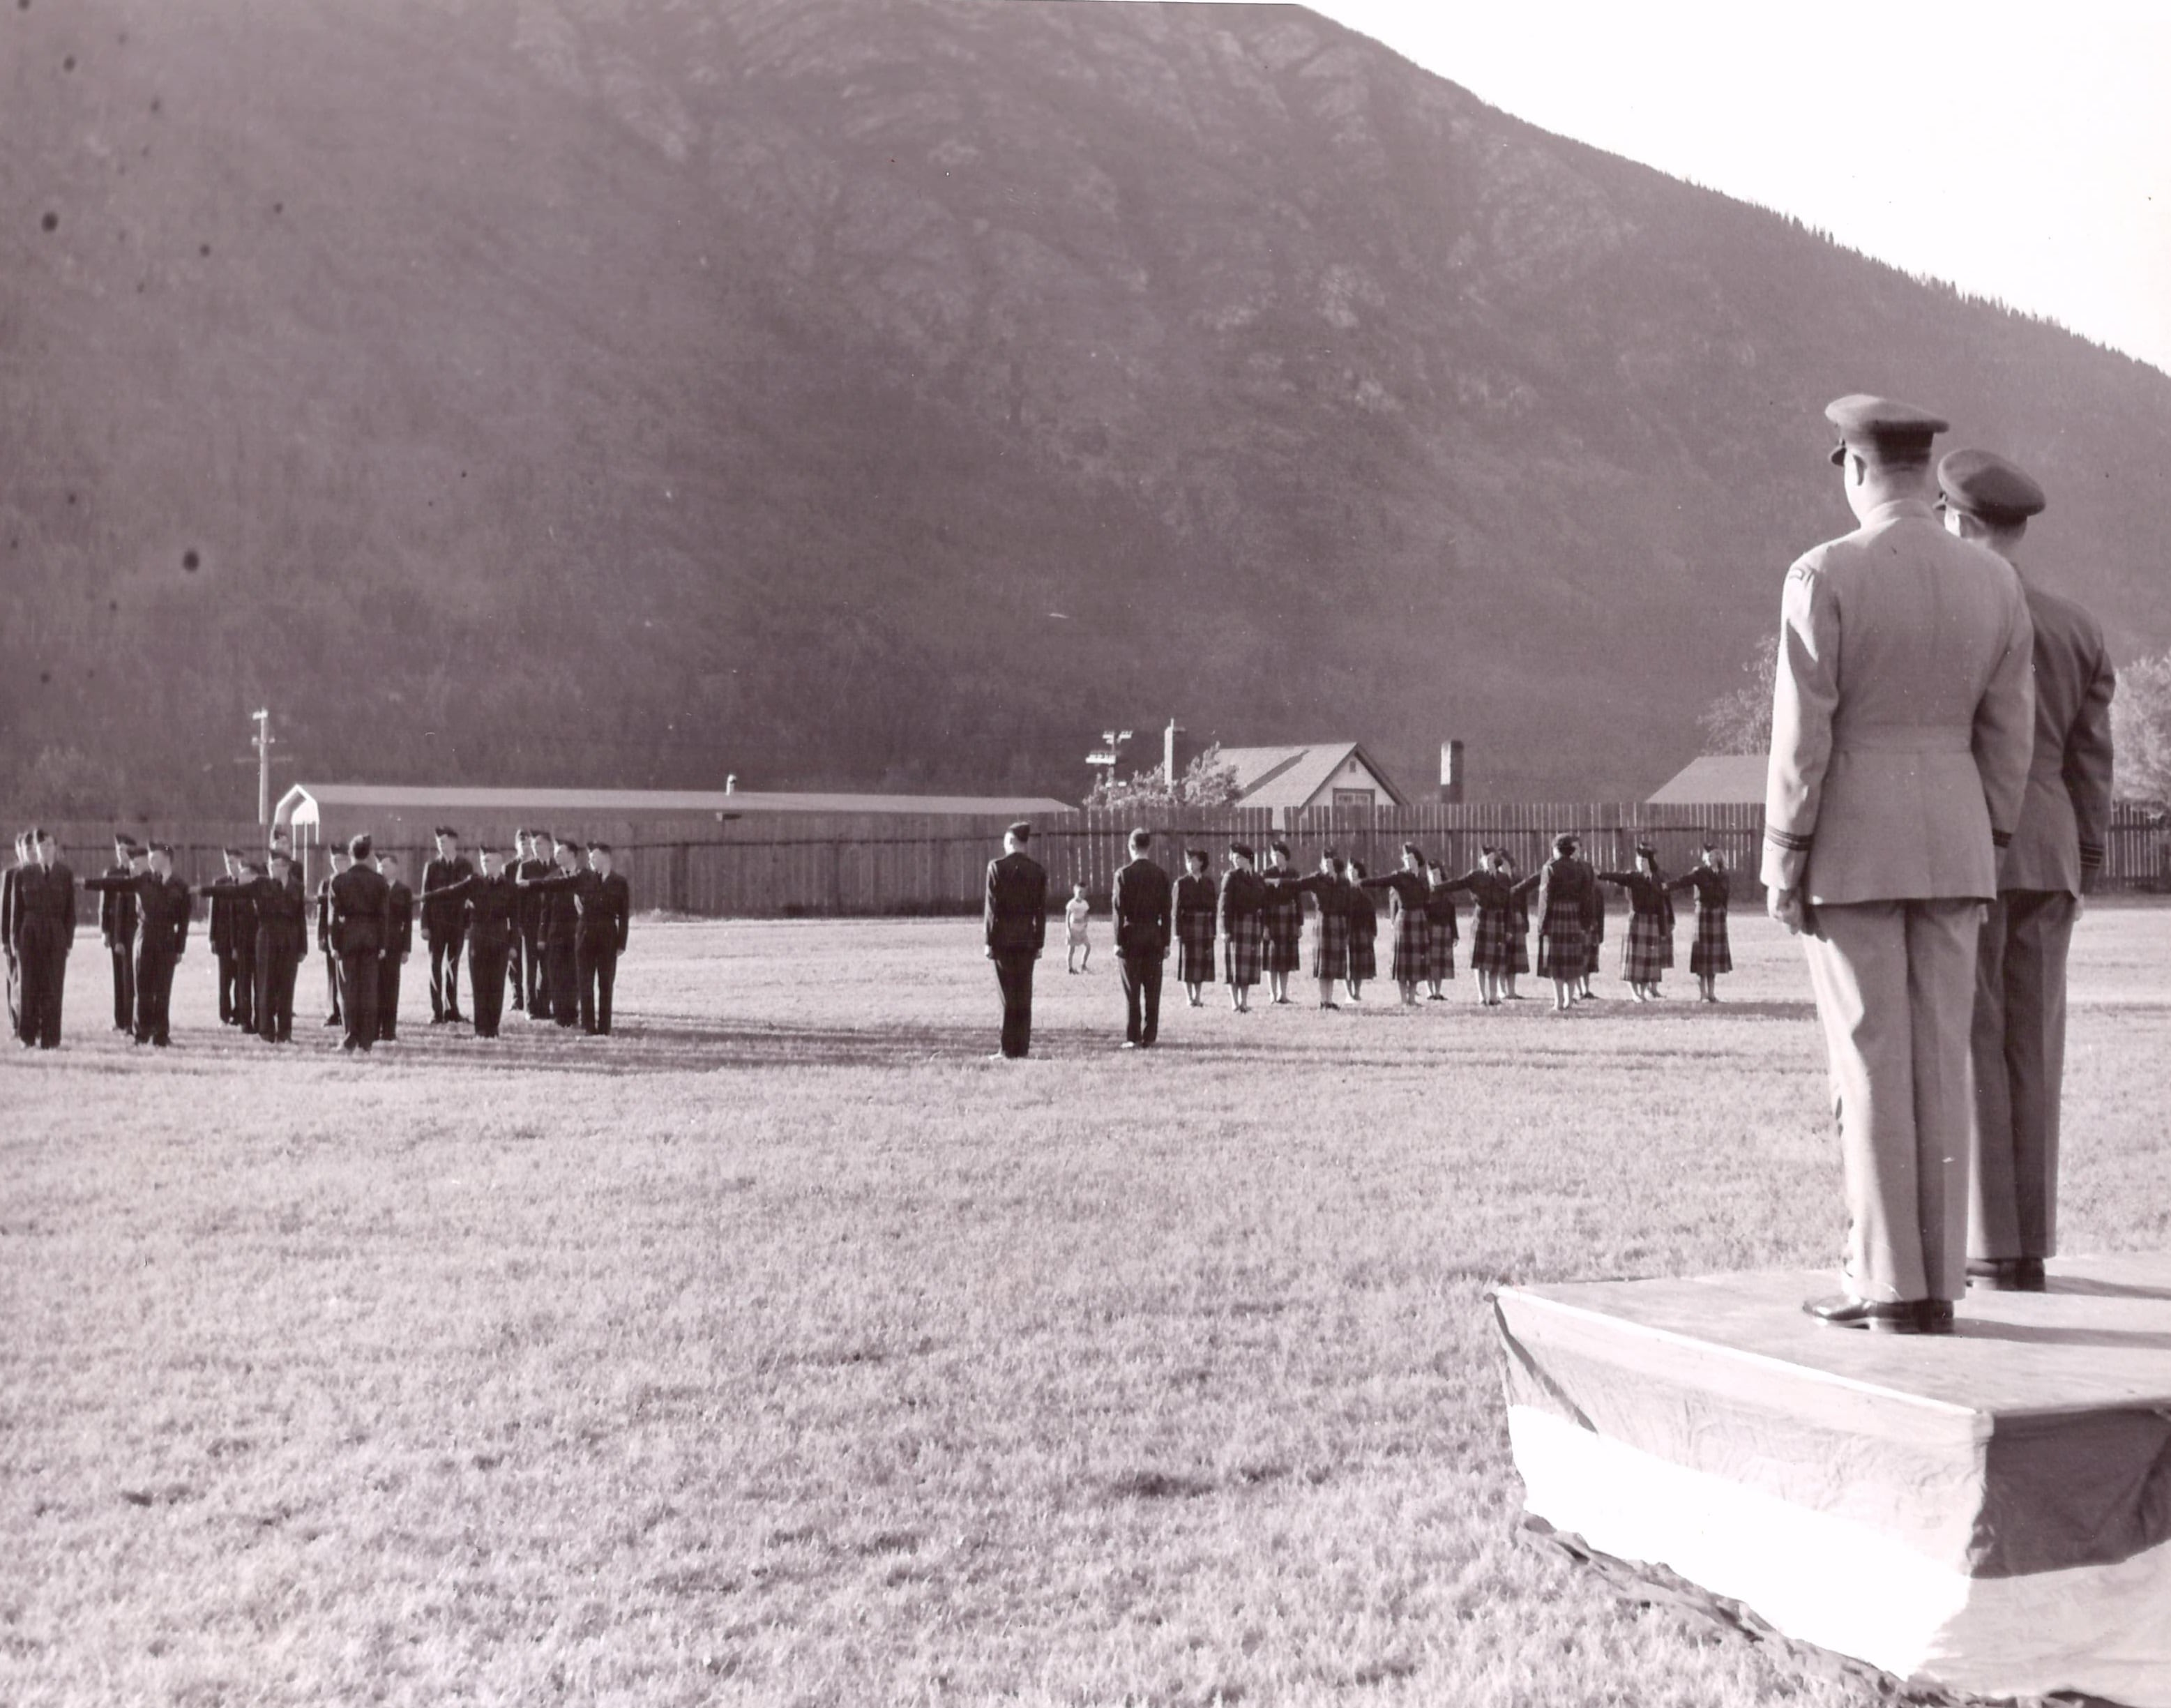 70th Annual Ceremonial Review for Nelson Air Cadets